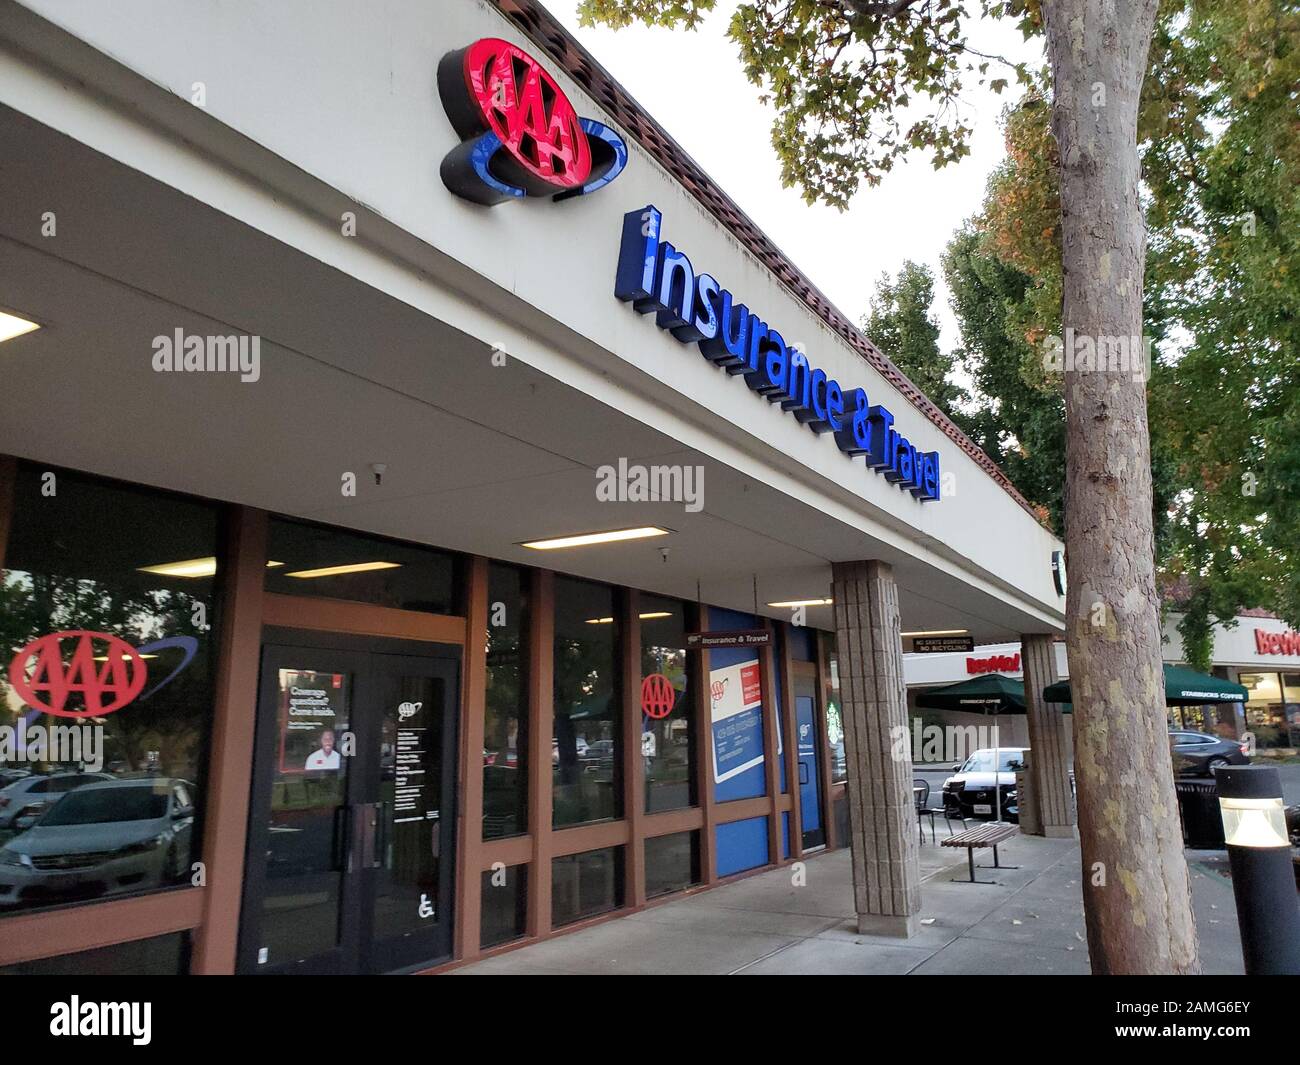 Facade With Sign At Office Of American Automobile Association Aaa Insurance Company In San Ramon California November 3 2019 Stock Photo Alamy